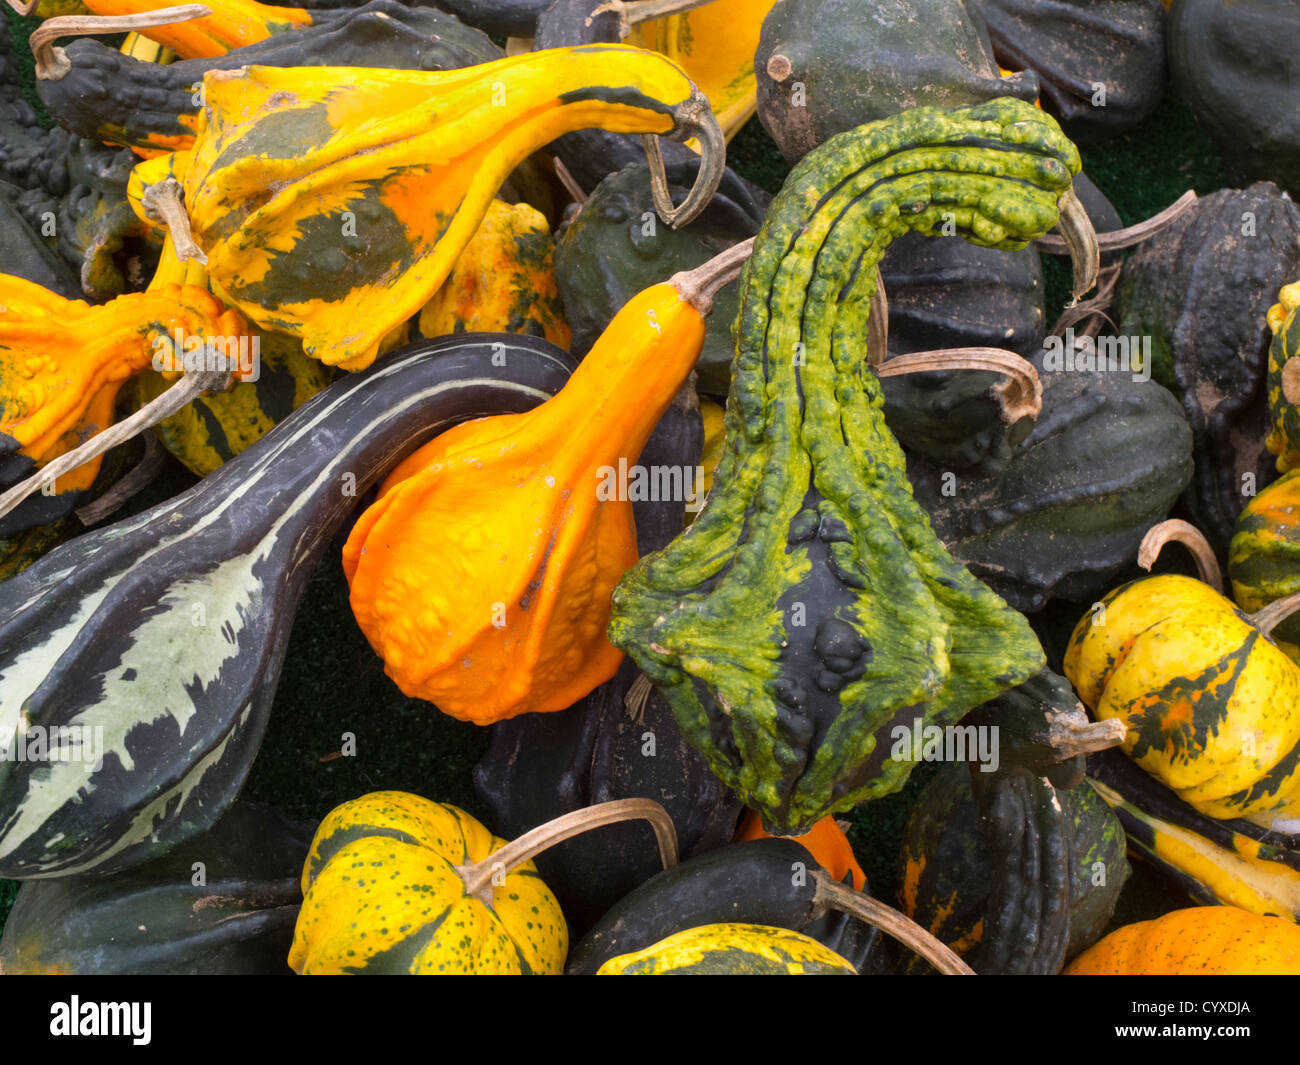 pile of ornamental gourds Stock Photo